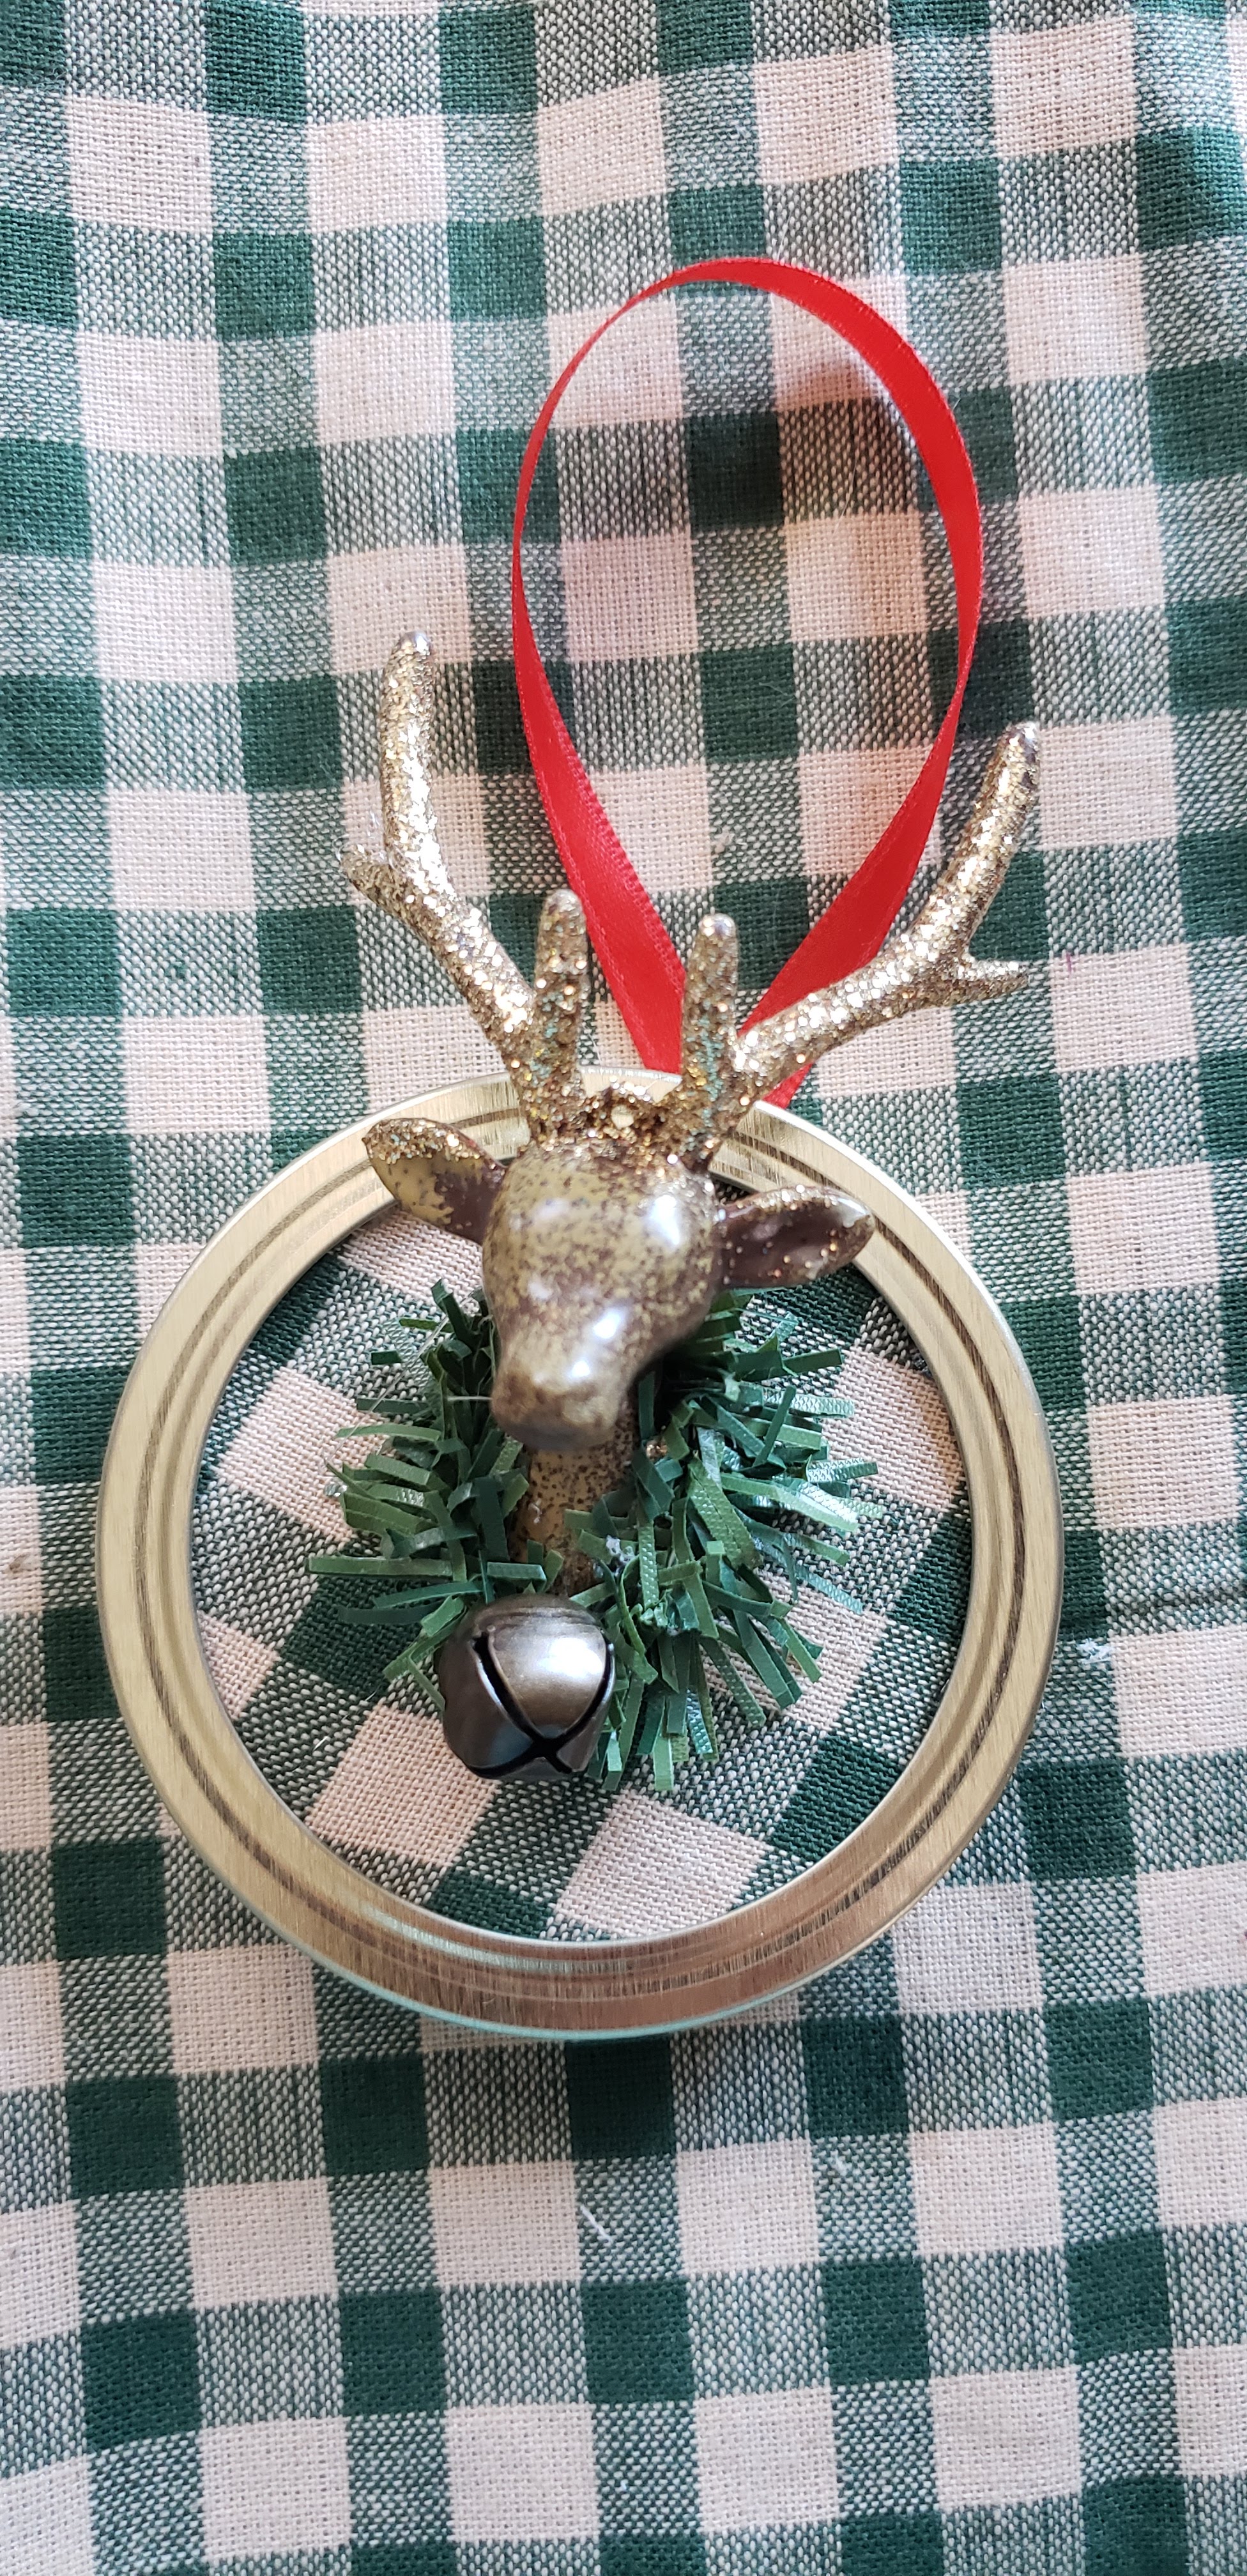 add the ornament and a ribbon